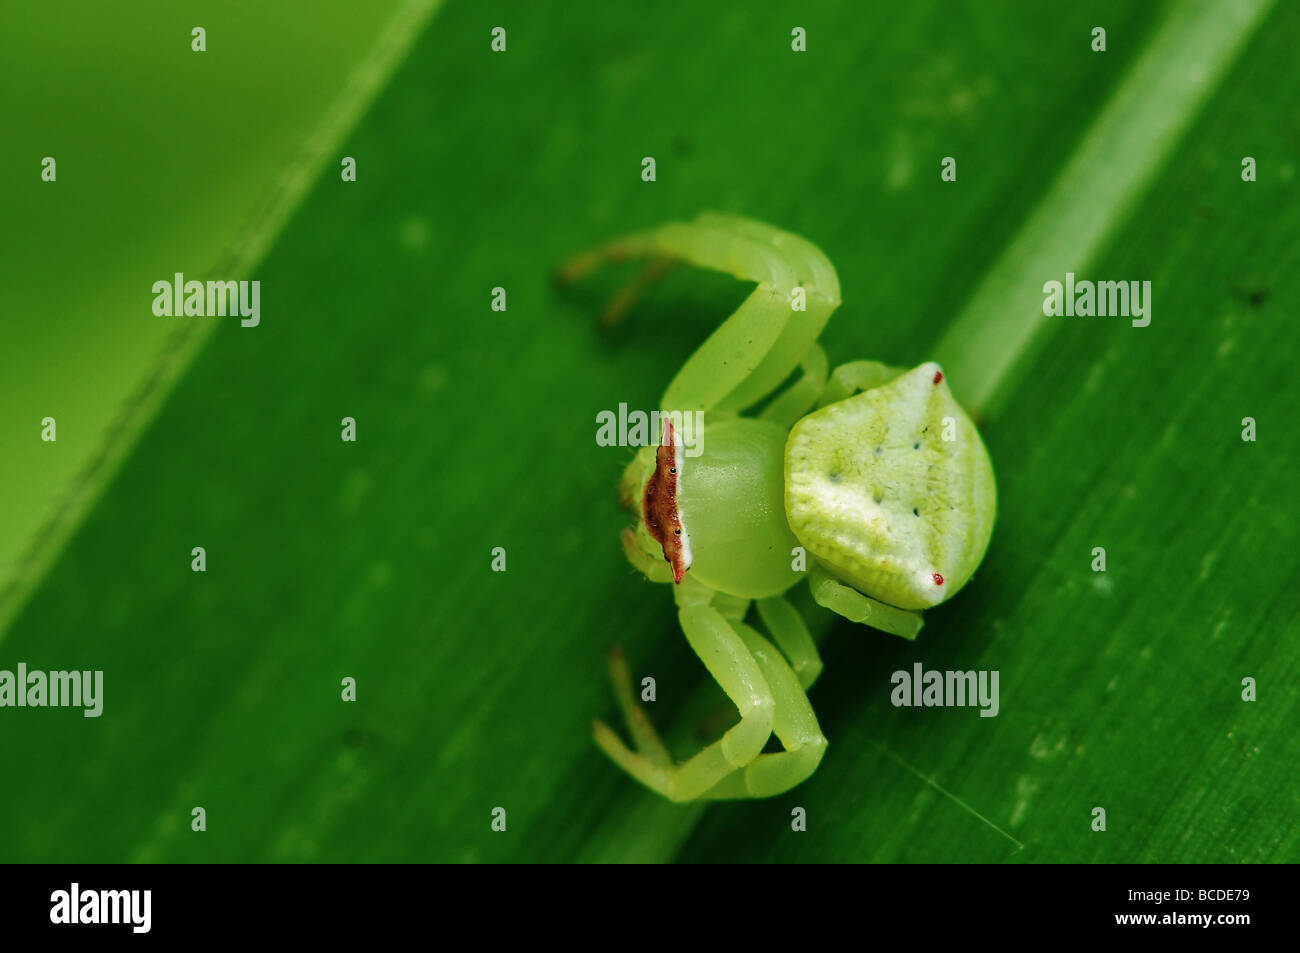 green crab spider in the parks Stock Photo